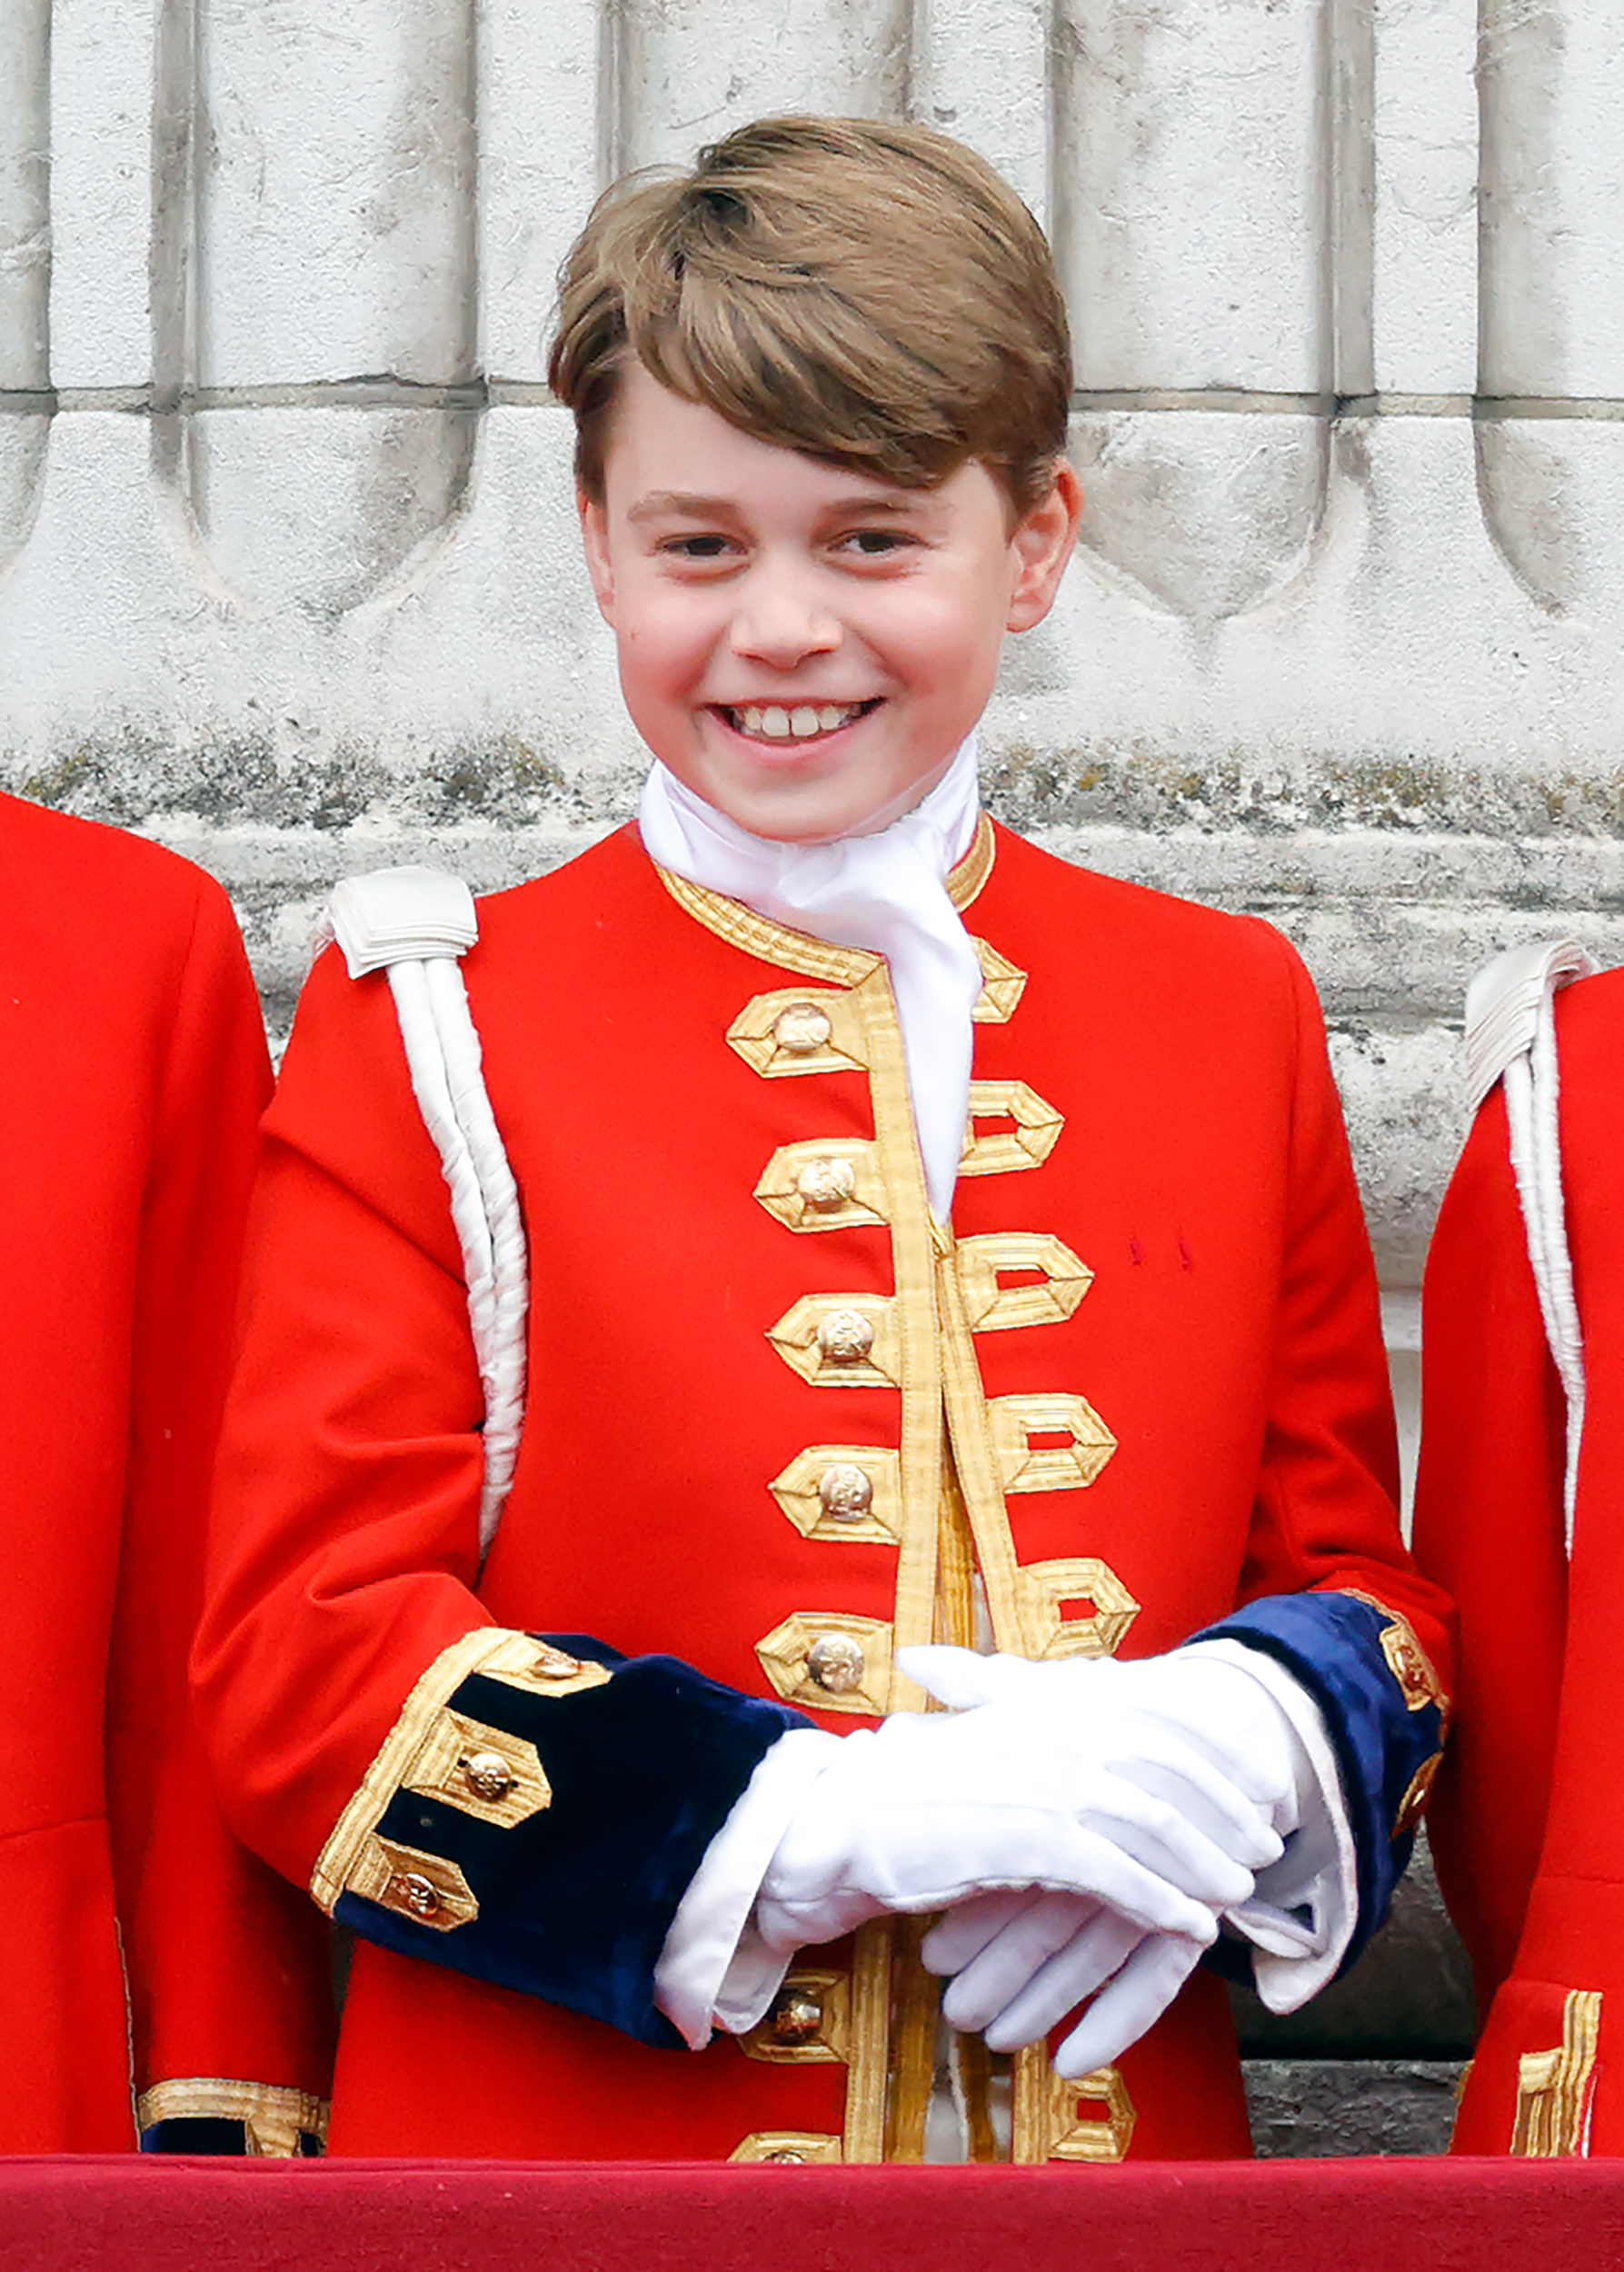 <p>Second in line to the throne is Prince George, who will be crowned king upon the death of his father, Prince William. While that day is many years in the future, it's interesting to note that the youngest monarch ever crowned in British history was King Henry VI, who ascended to the throne when he was only 8 months and 26 days old.</p><p>MORE: <a href="https://www.wonderwall.com/celebrity/photos/cutest-photos-royal-cambridge-kids-prince-george-princess-charlotte-prince-louis-3019337.gallery">The best photos of William and Kate's three heirs</a></p>